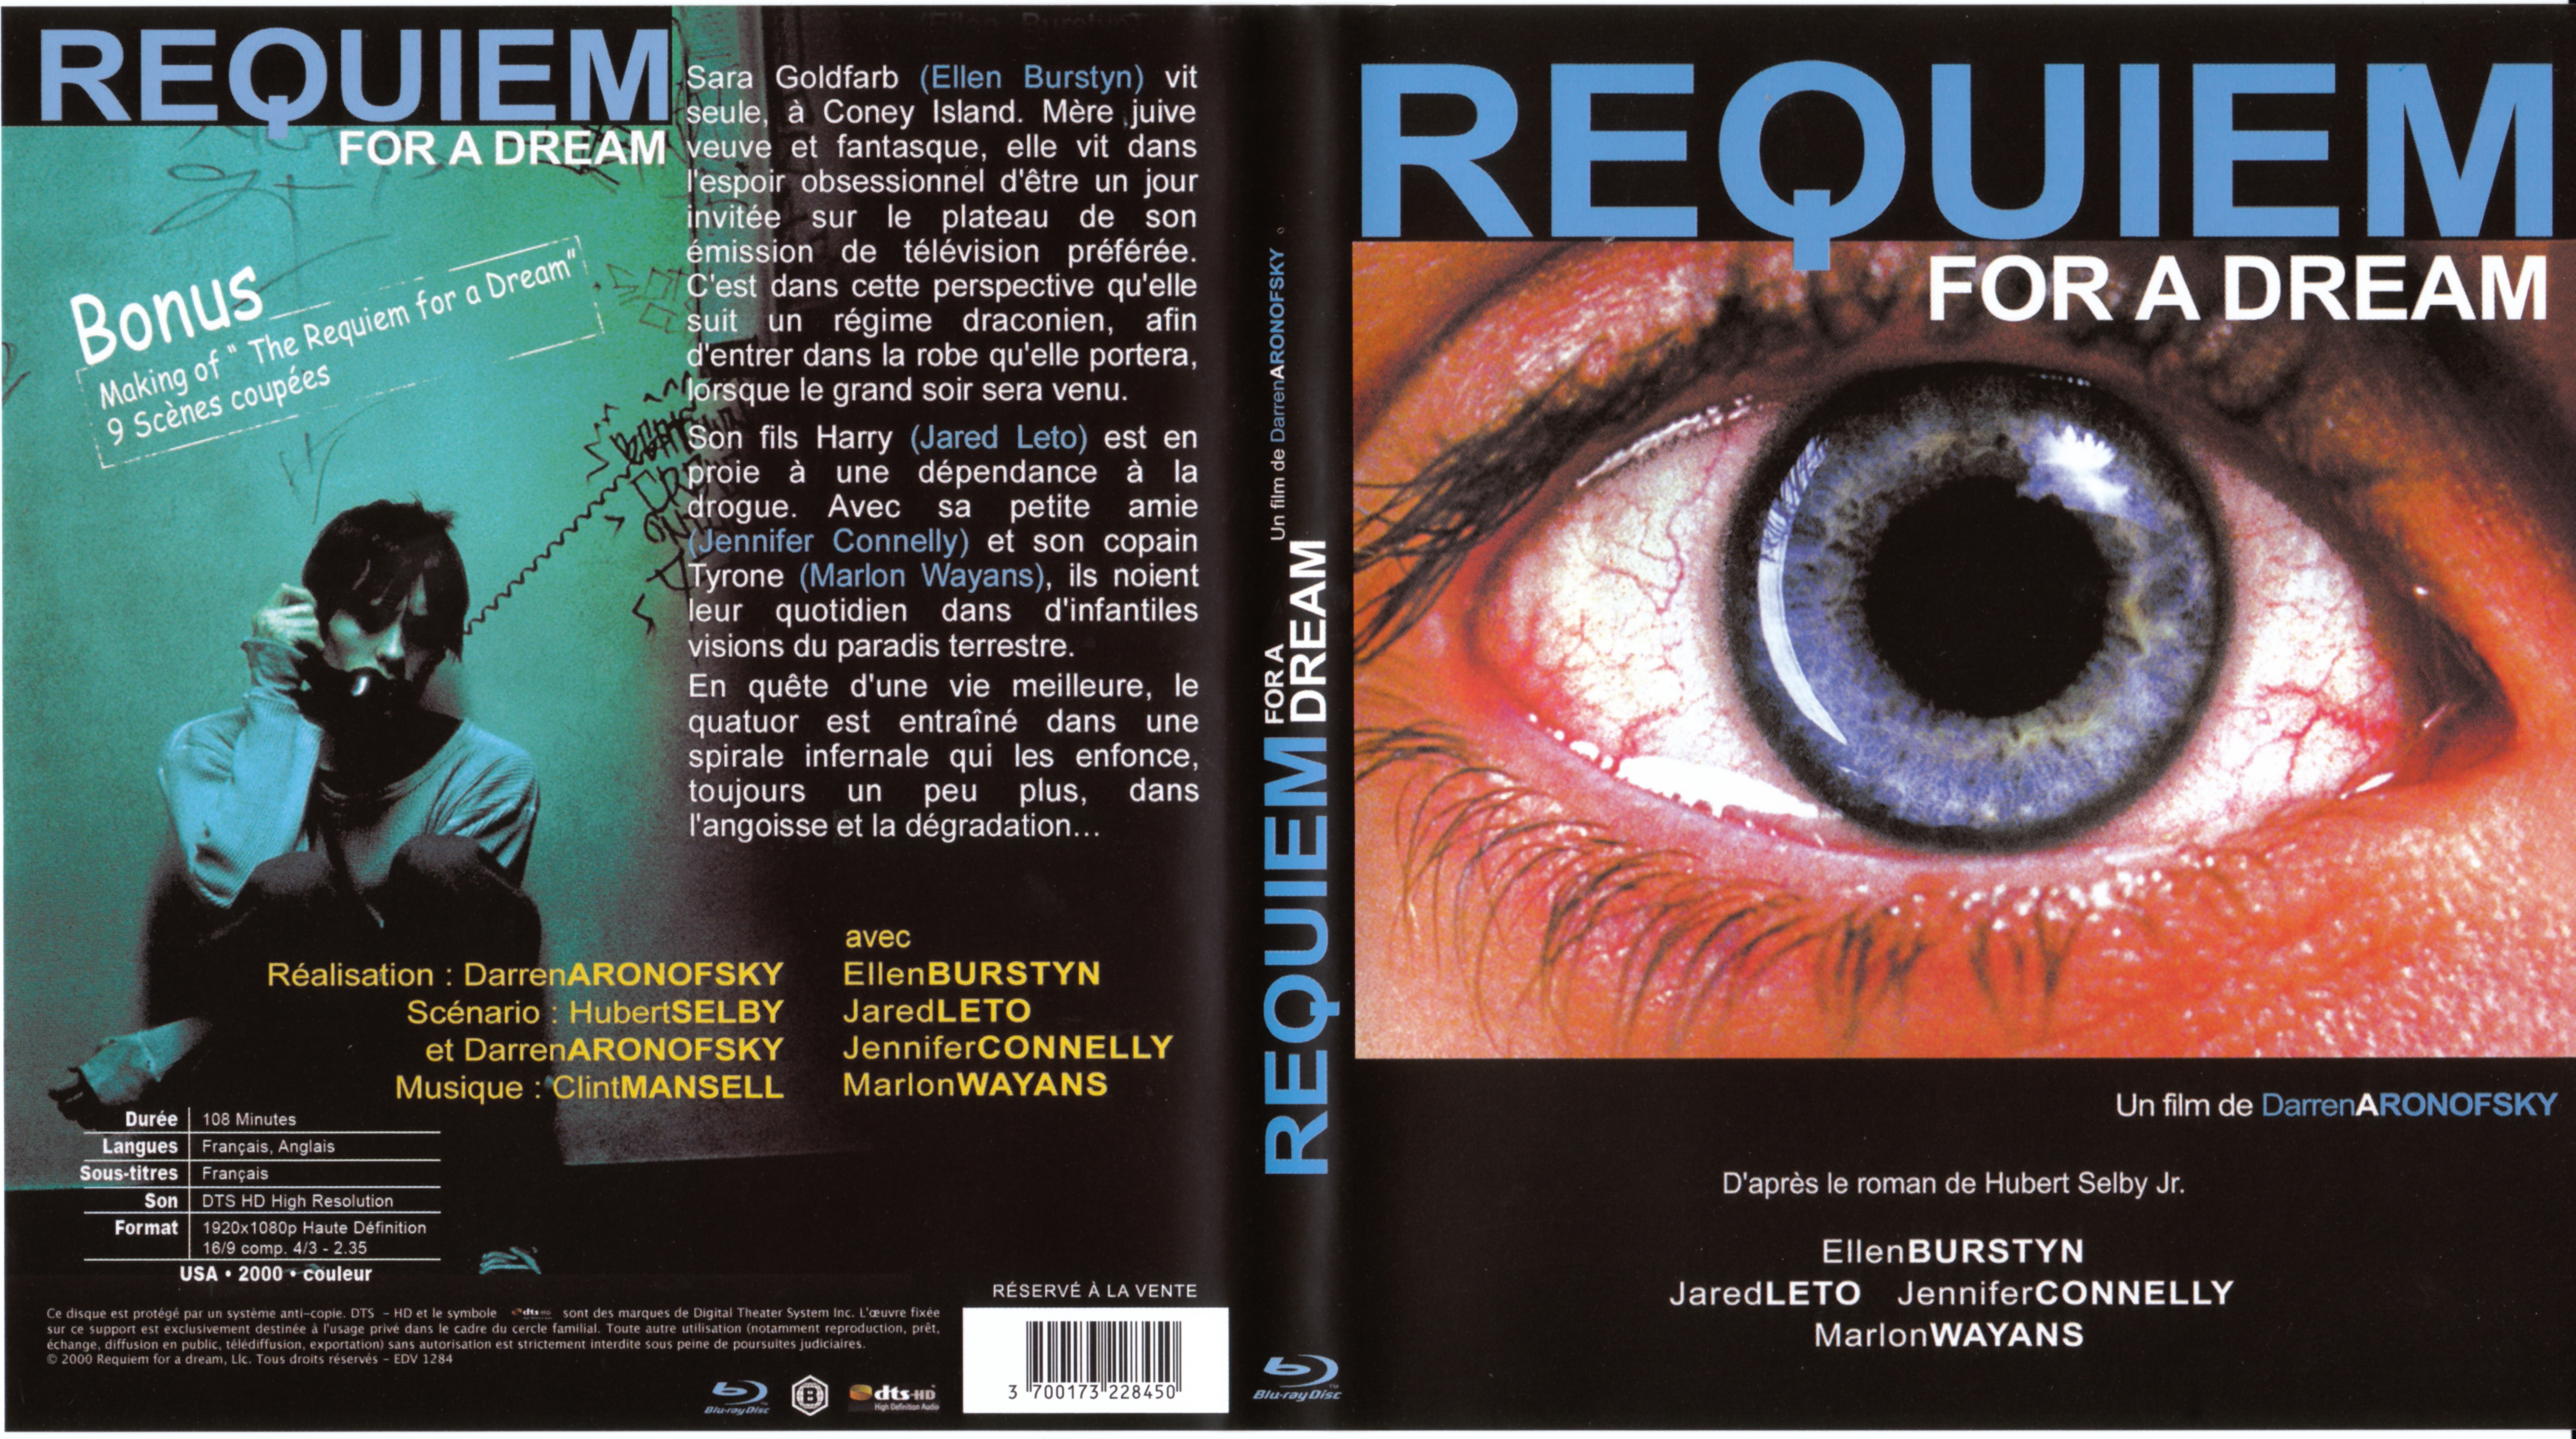 Jaquette DVD Requiem for a dream (BLU-RAY)